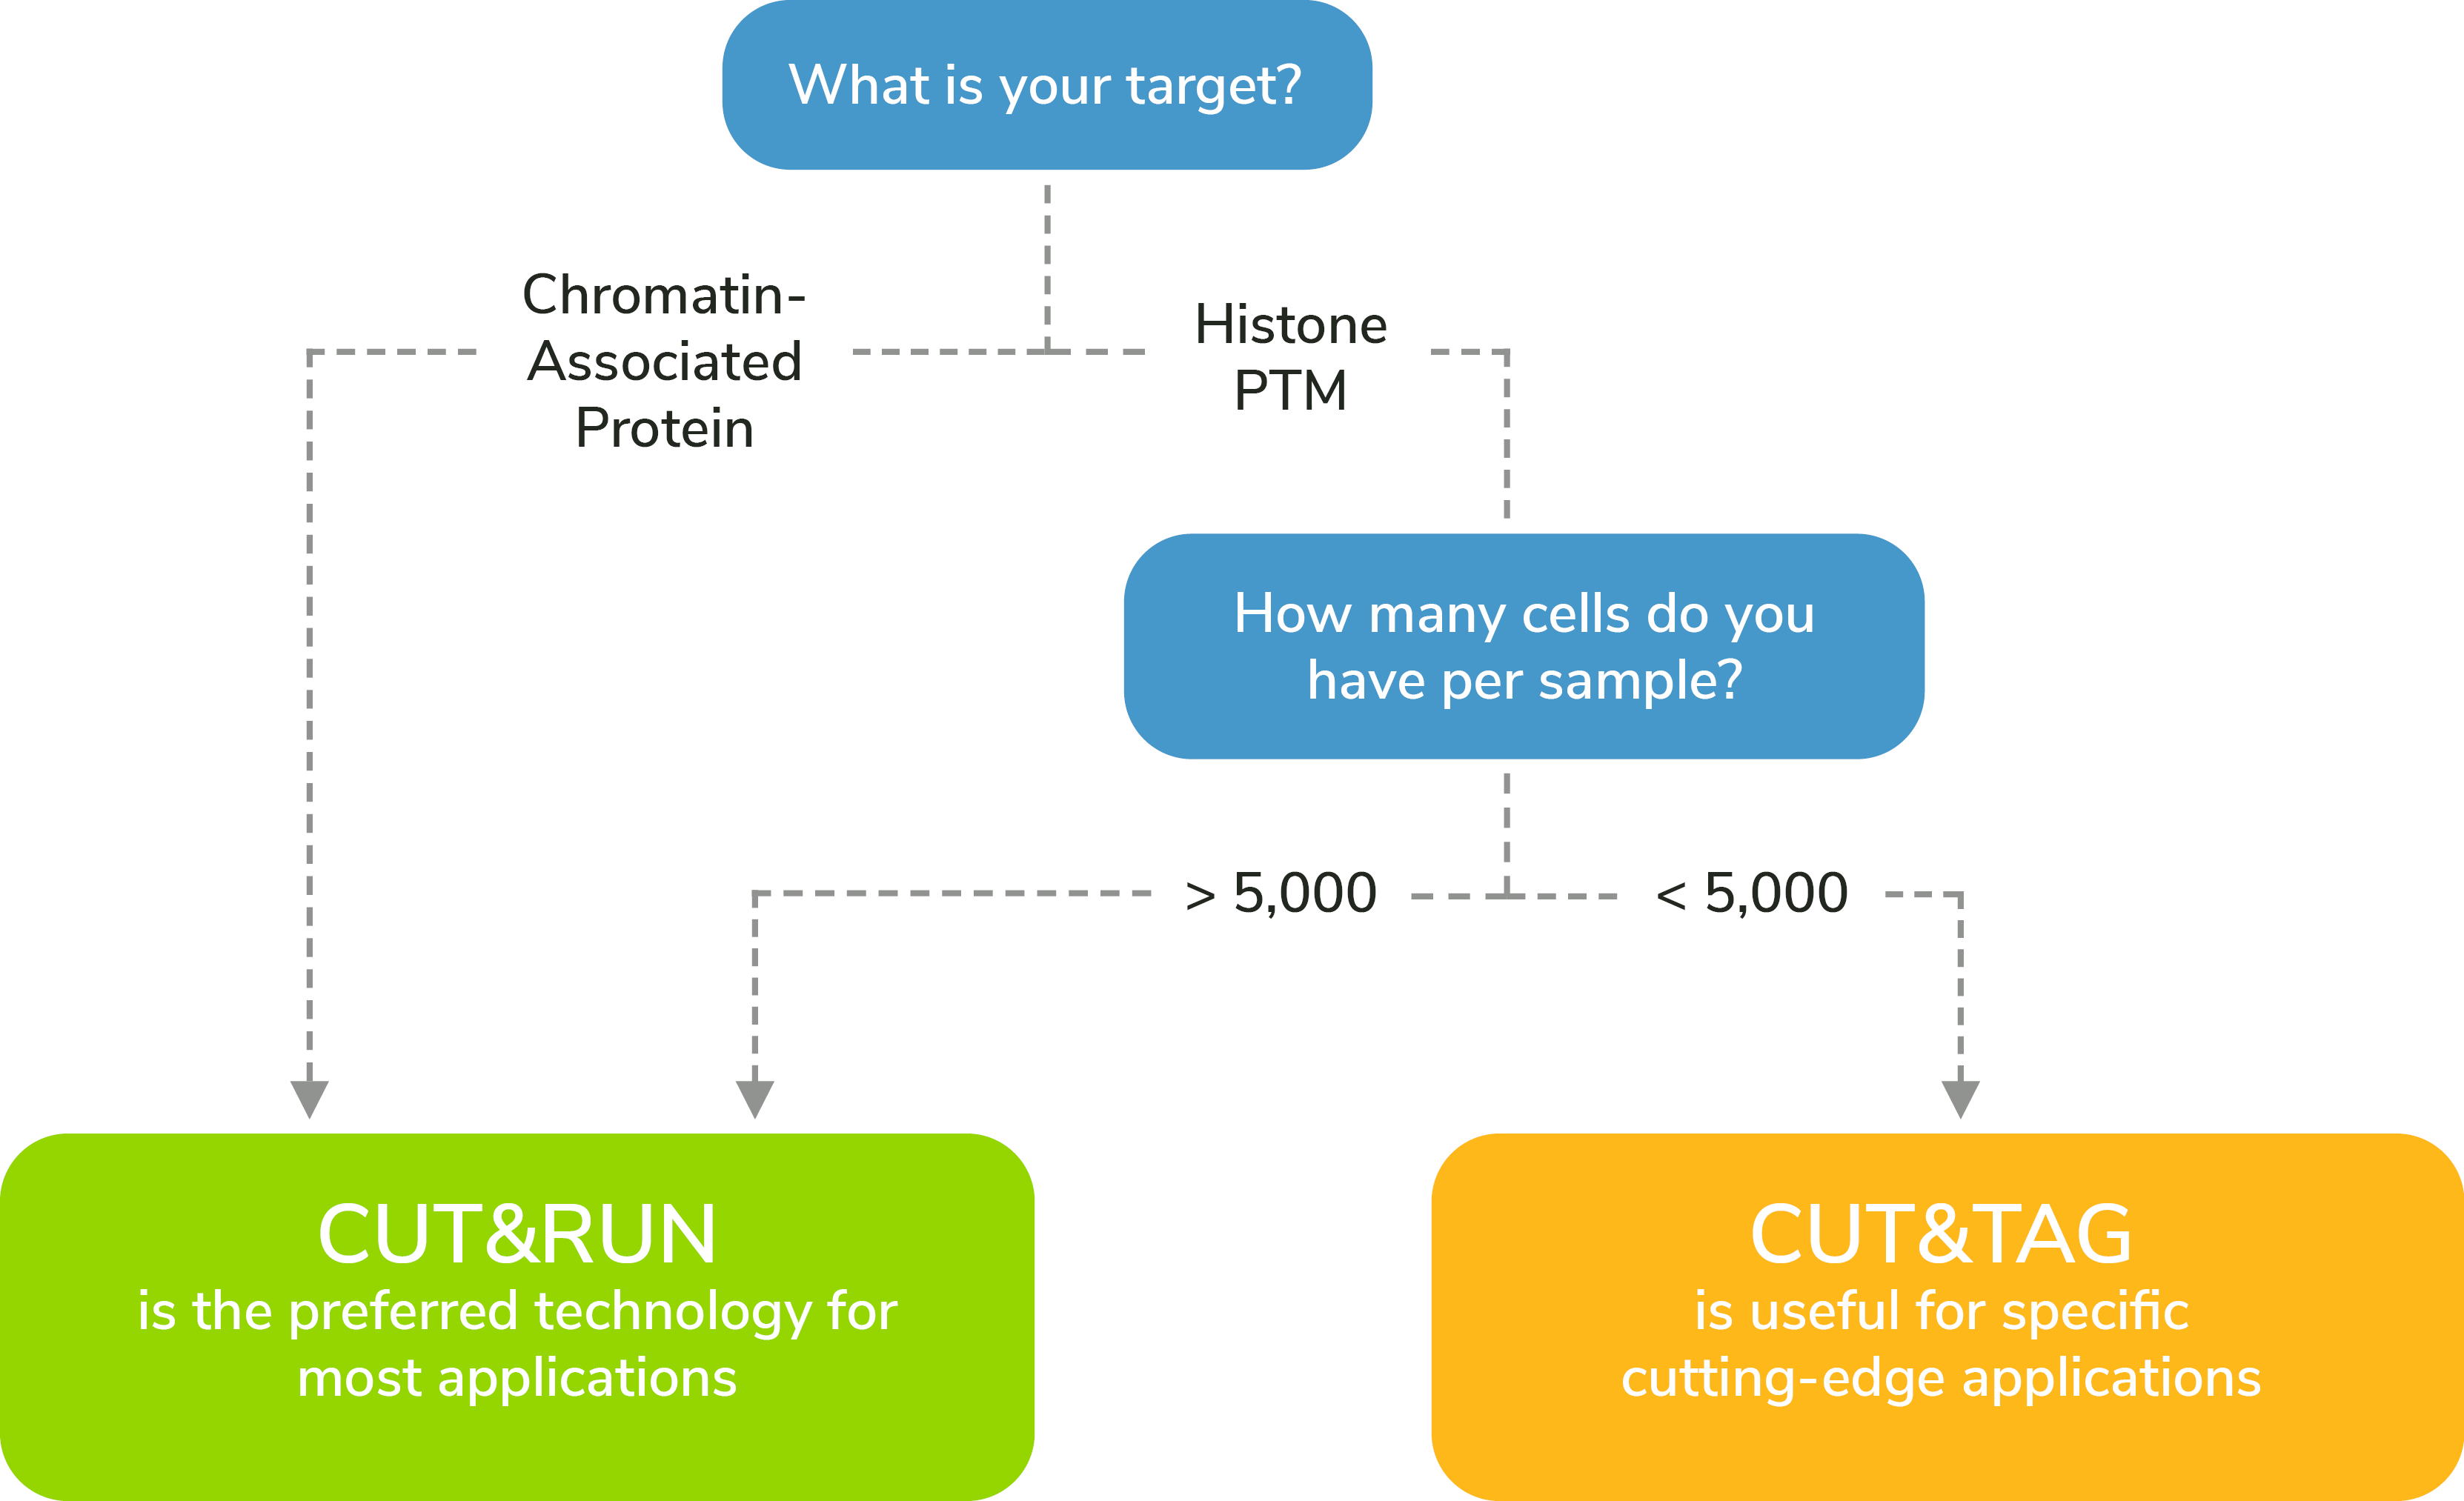 CUT&RUN or CUT&Tag: which approach is right for you?